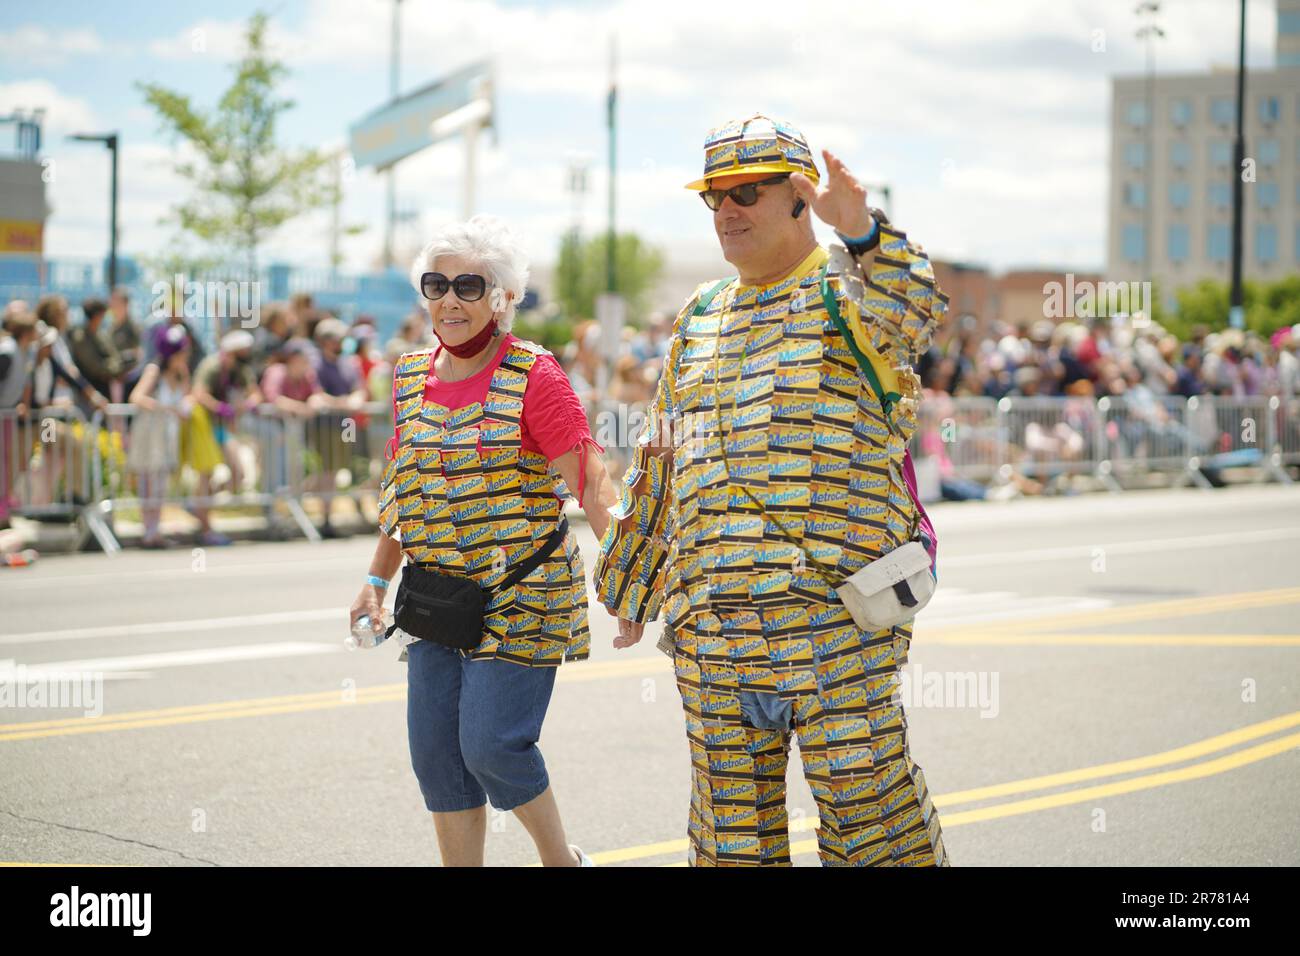 NEW YORK - JUNE 18, 2022: Participants marching during the 40th Annual Mermaid Parade at Coney Island, the largest parade in the nation and a celebrat Stock Photo